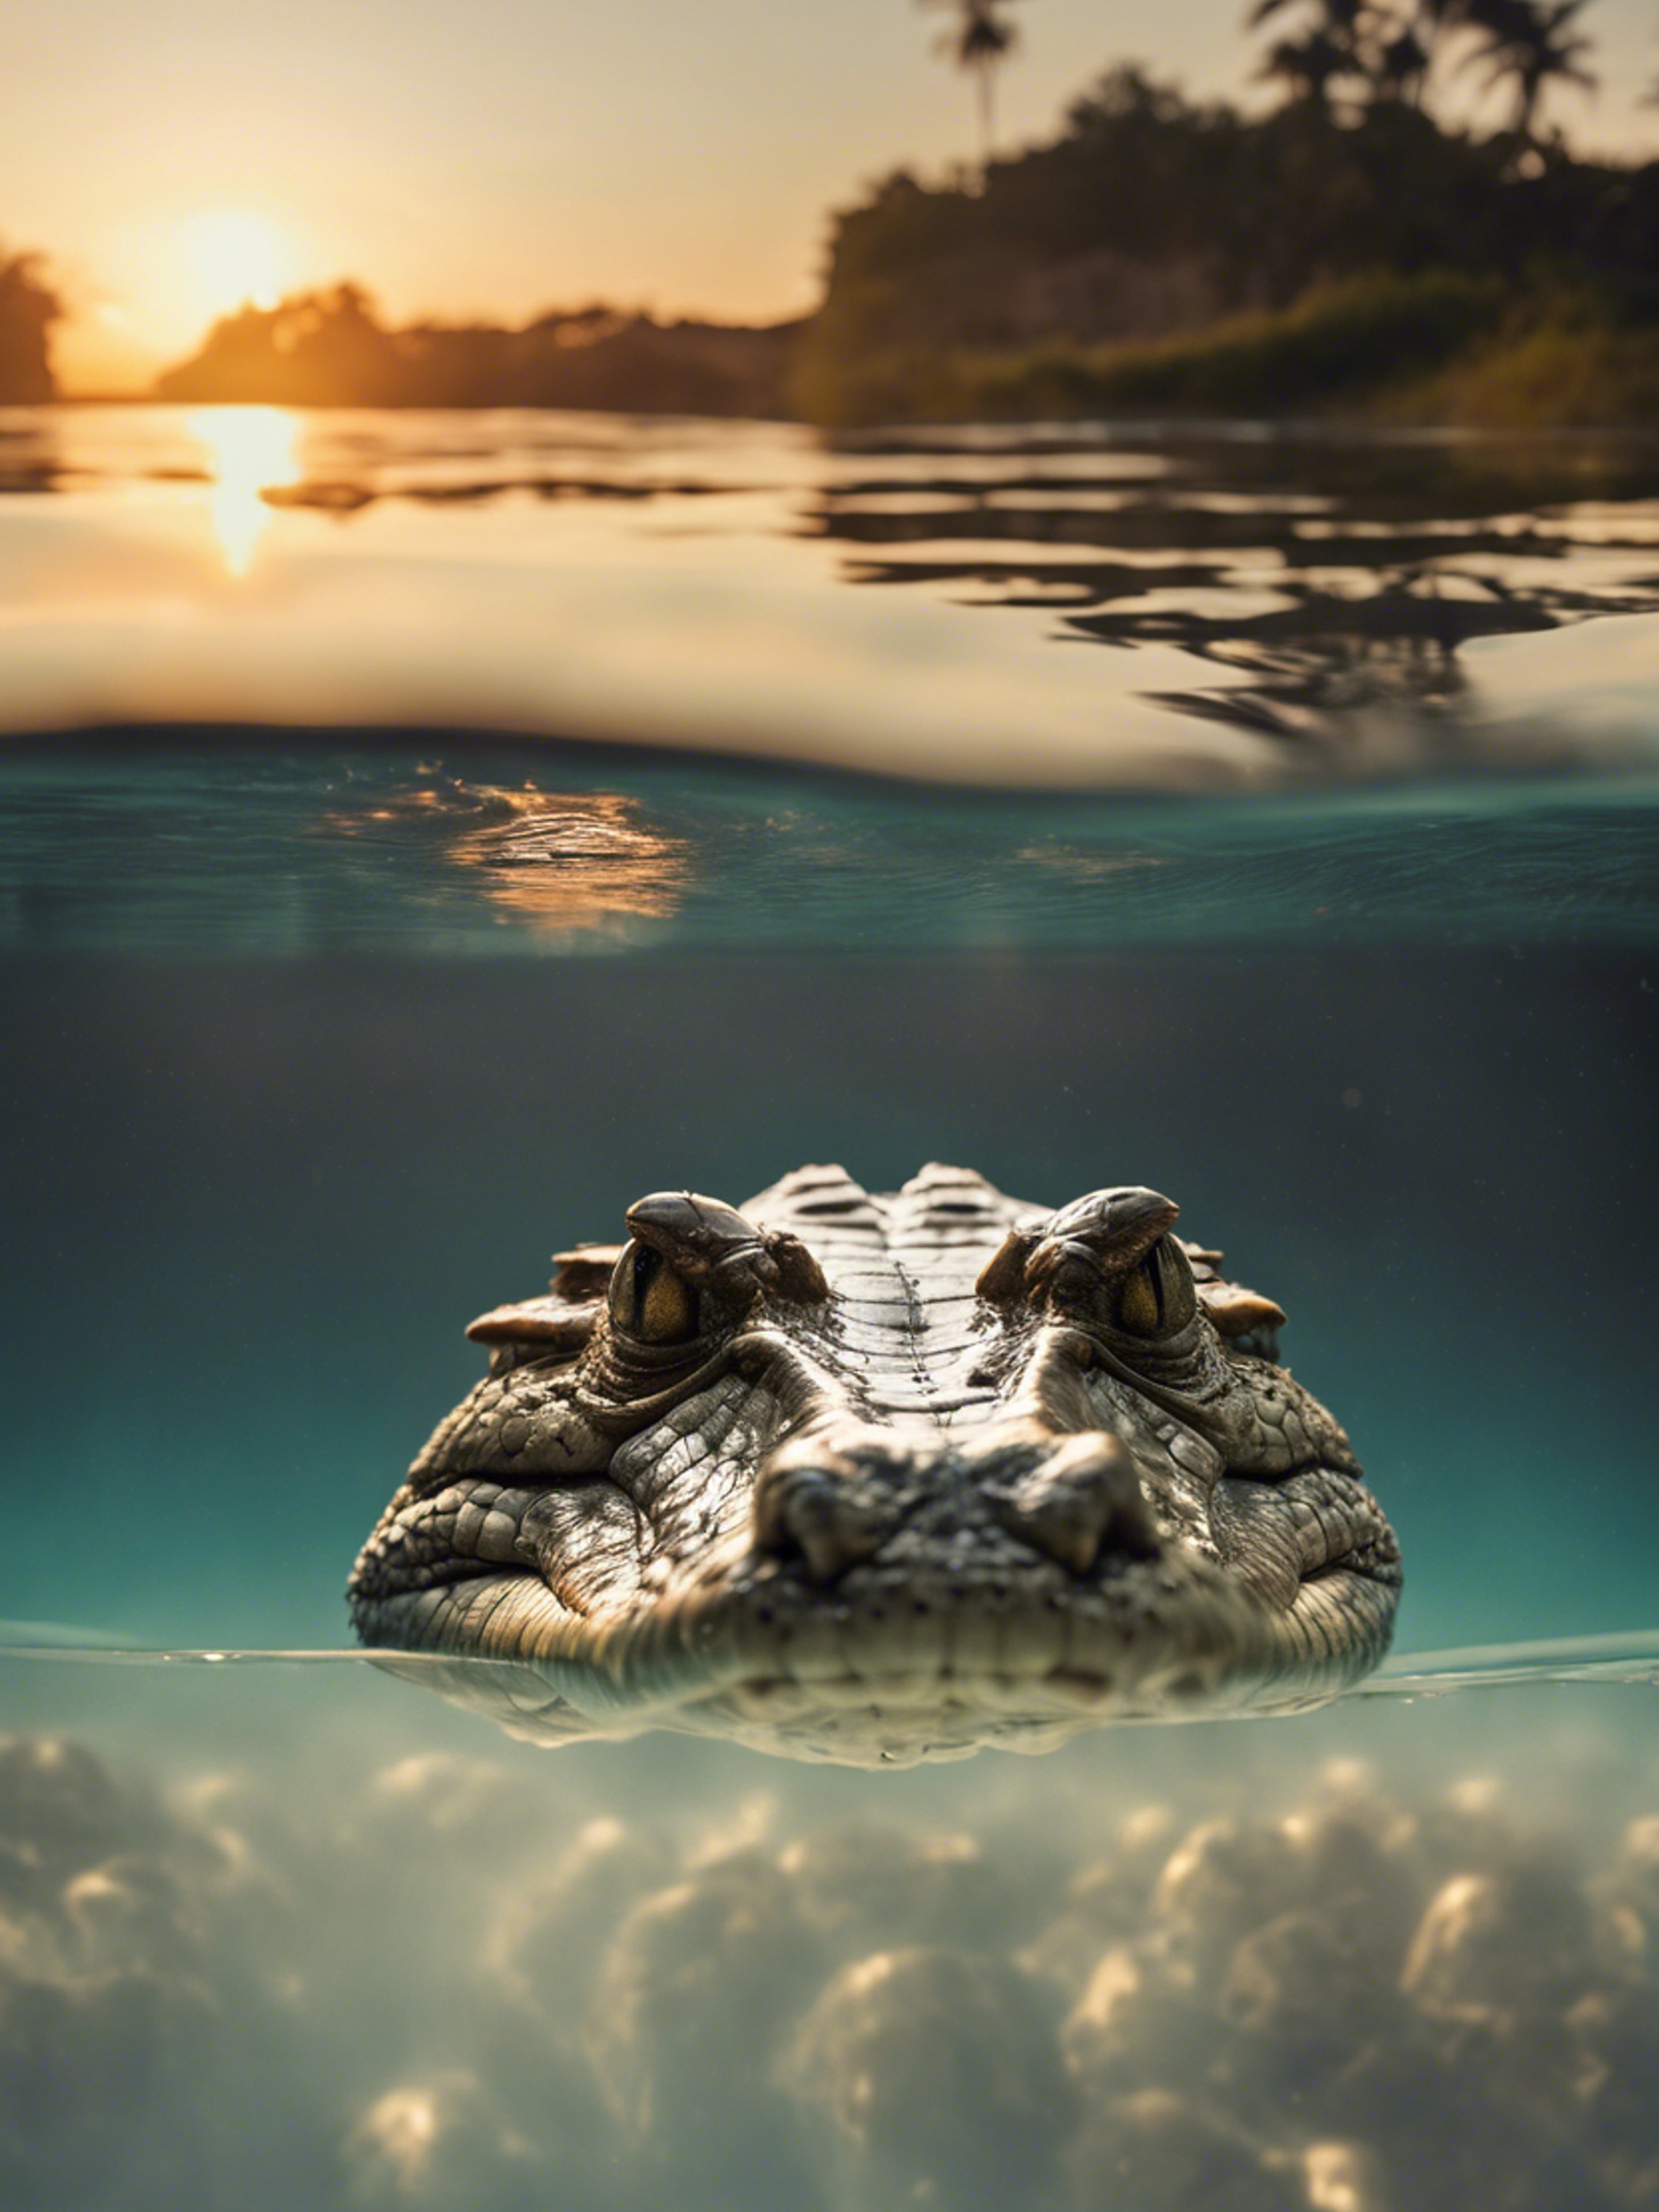 A split-view of a crocodile above and below water at sunset.壁紙[519c40baa3334ebf8373]